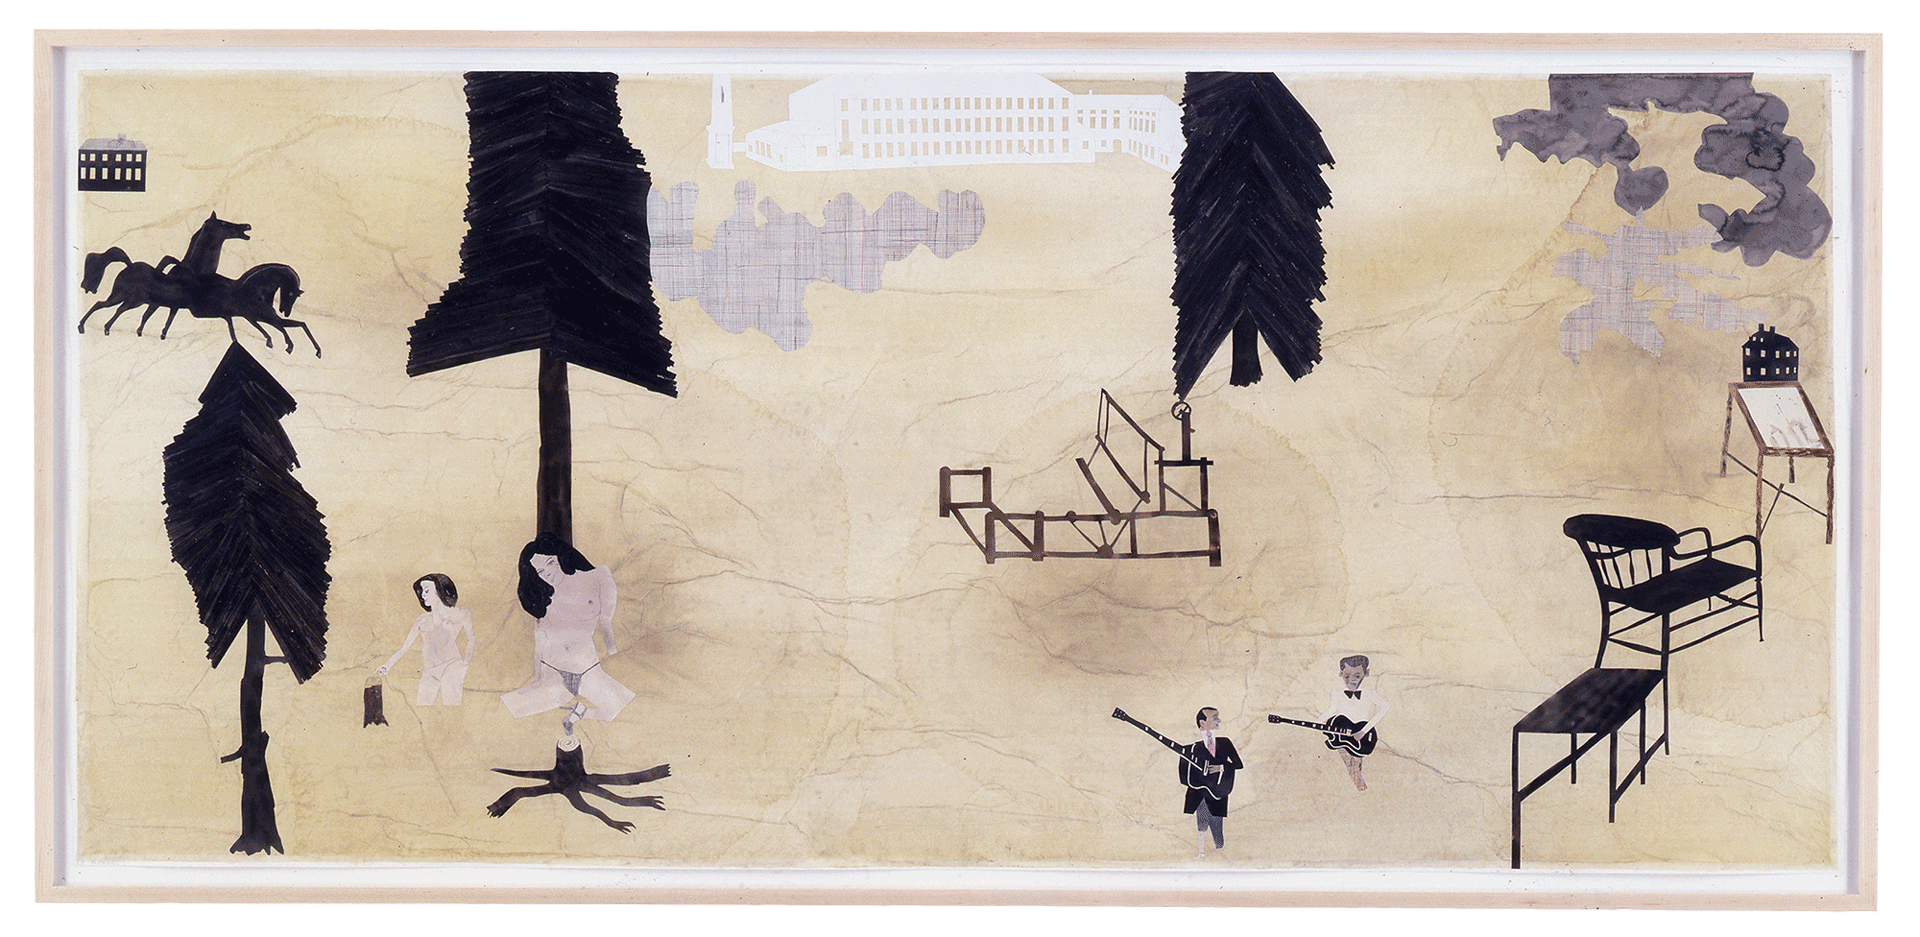 A work on paper by Jockum Nordstr√∂m, titled The Drawling Song, dated 2005